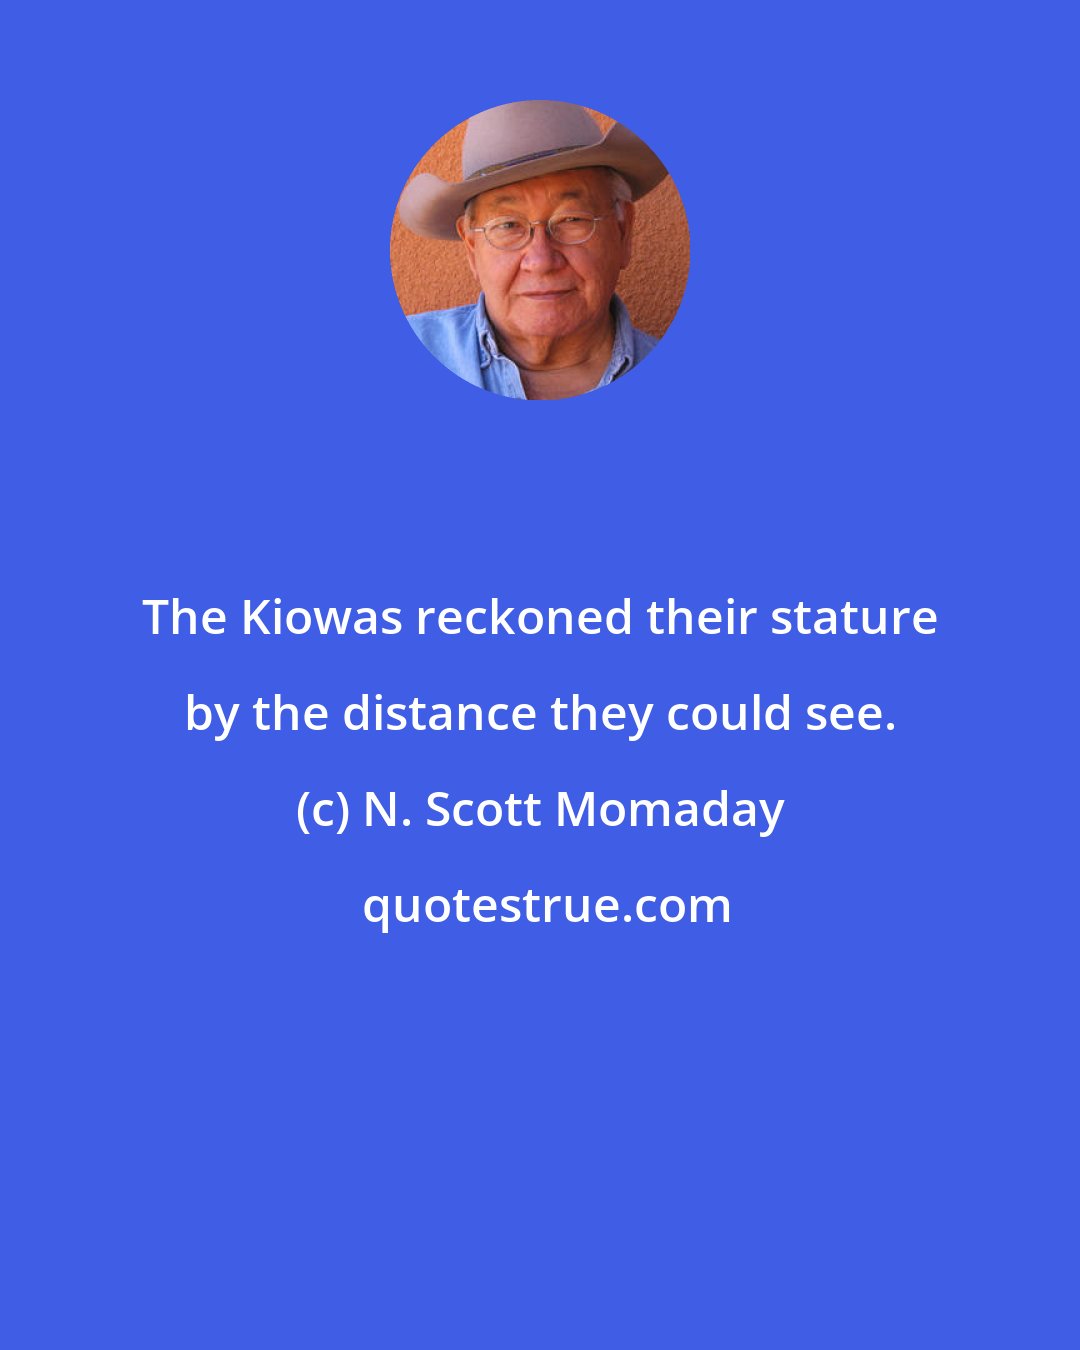 N. Scott Momaday: The Kiowas reckoned their stature by the distance they could see.